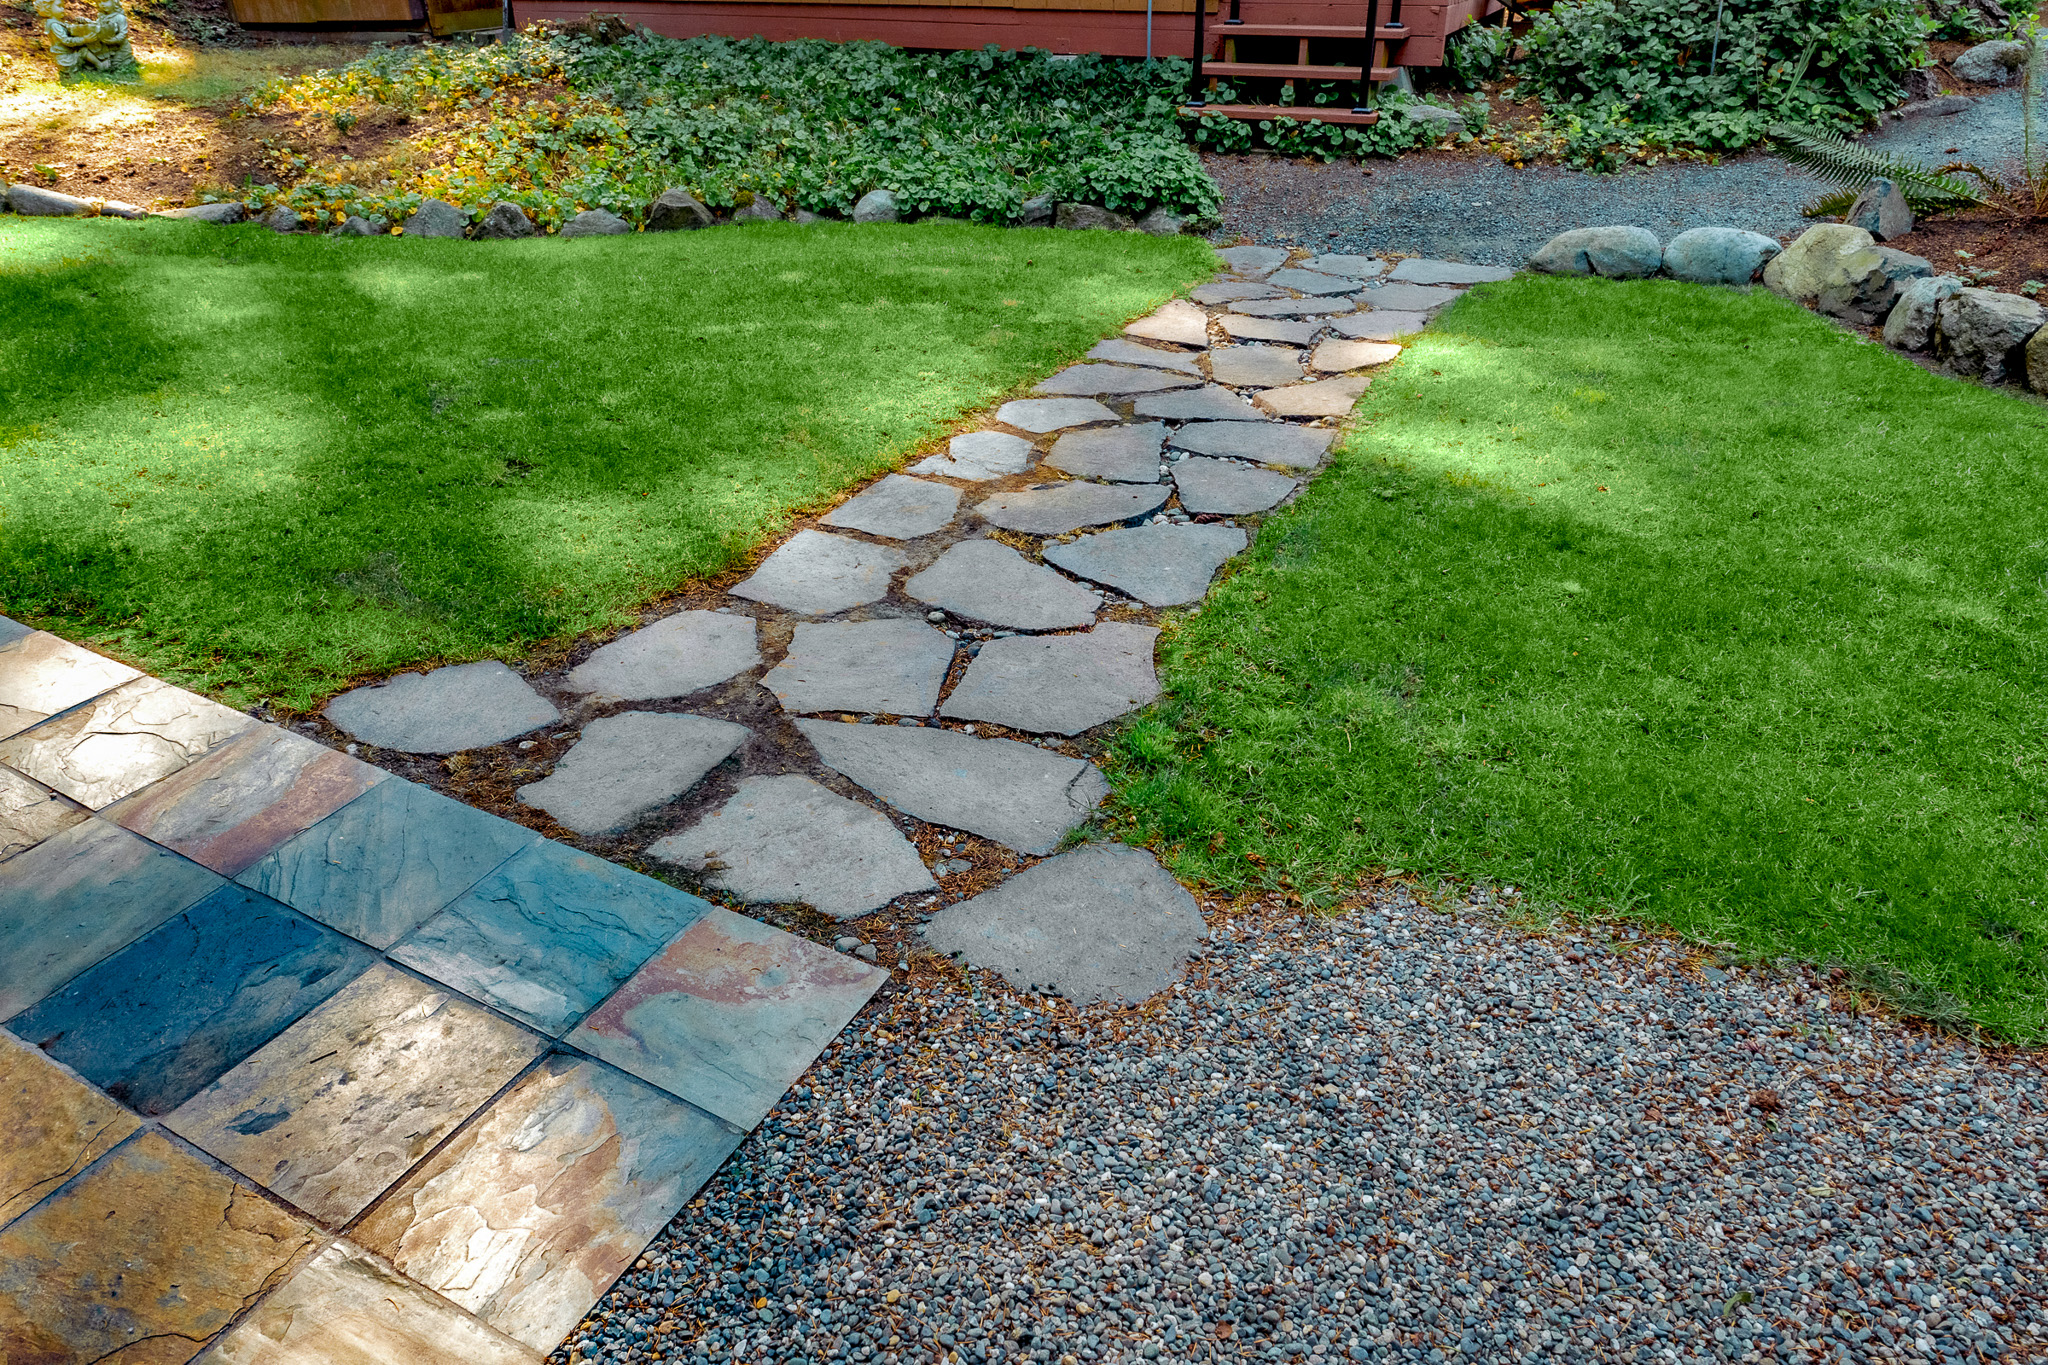 Flagstone path connects a gravel walkway to natural stone patio